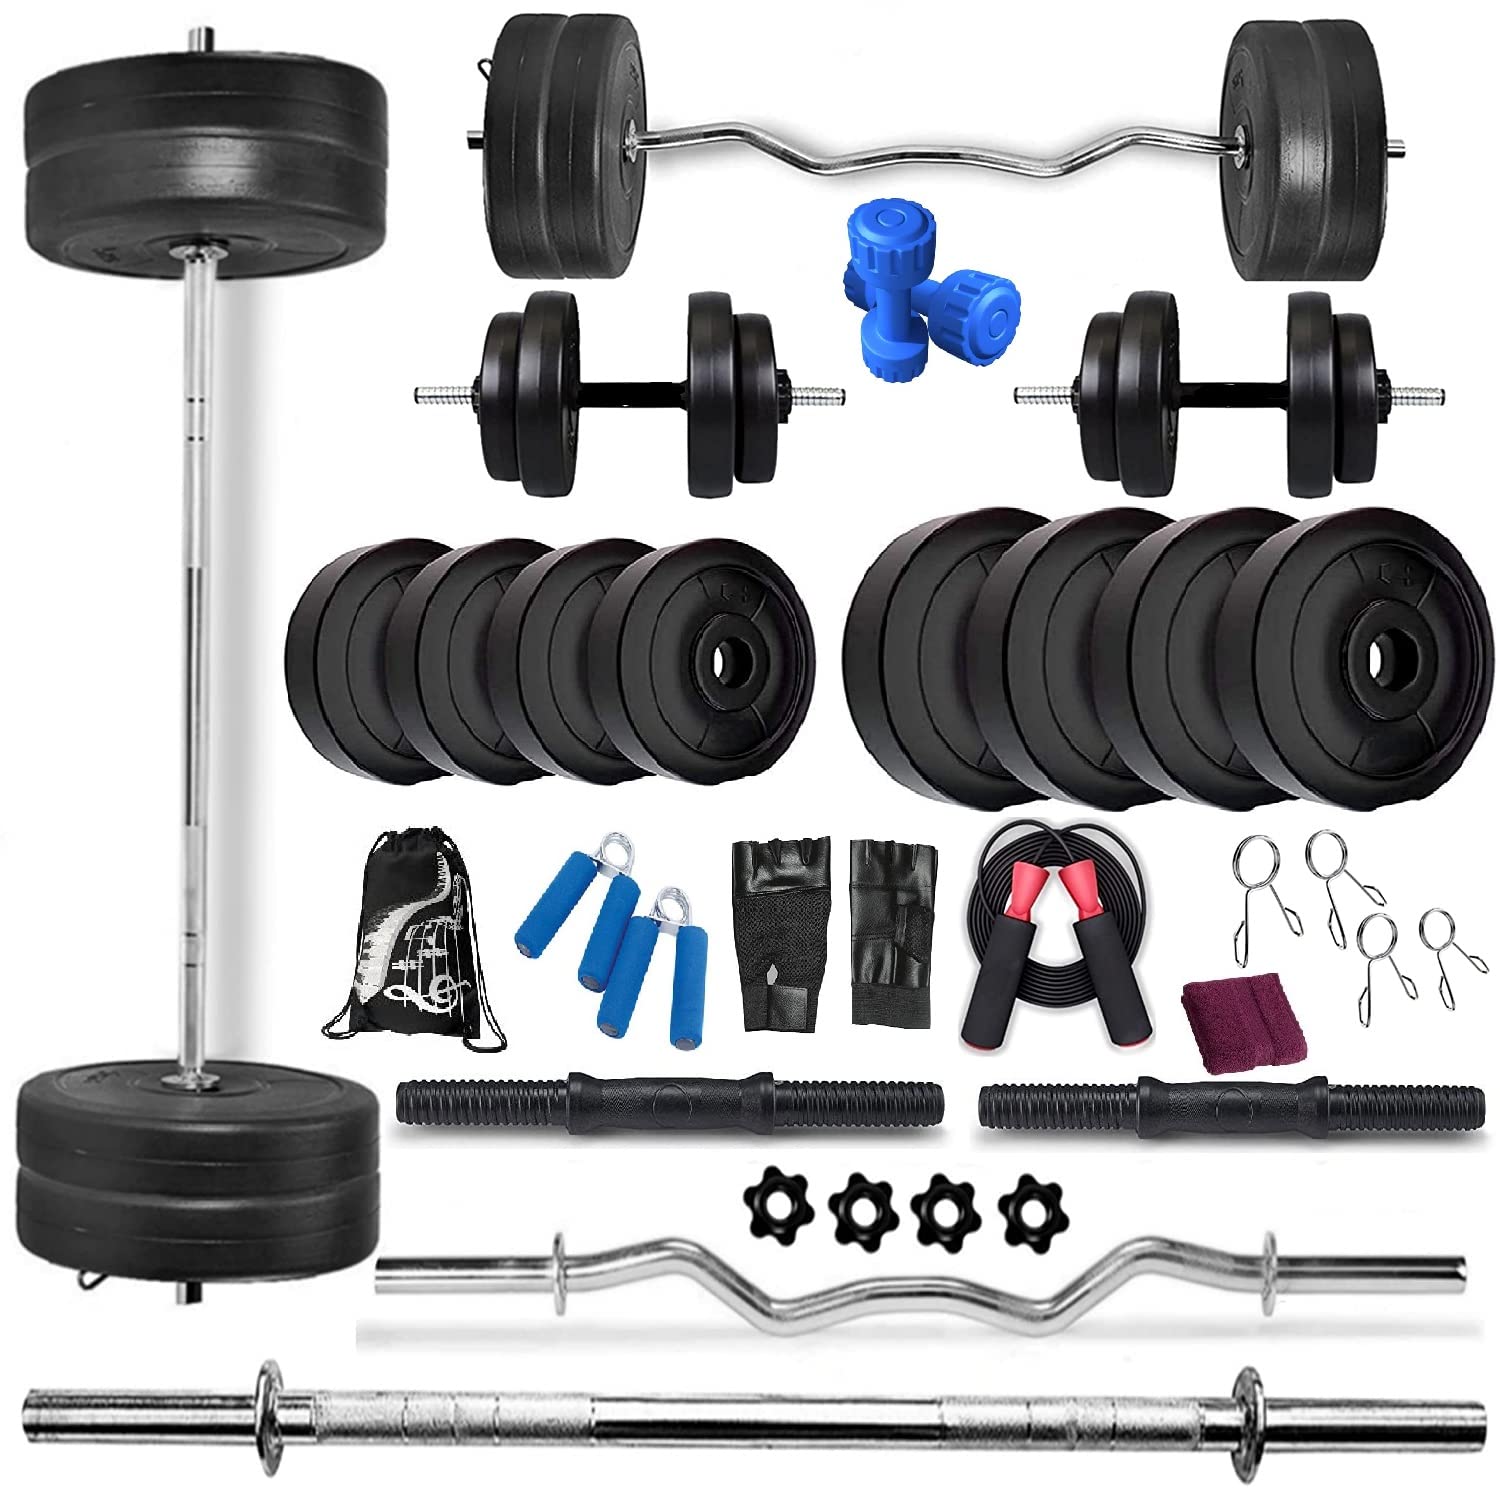 https://www.sportswing.in/wp-content/uploads/2021/07/Bodyfit-Home-Gym-Combo-Home-Gym-Set-Gym-Equipment-10-kg-1.jpg